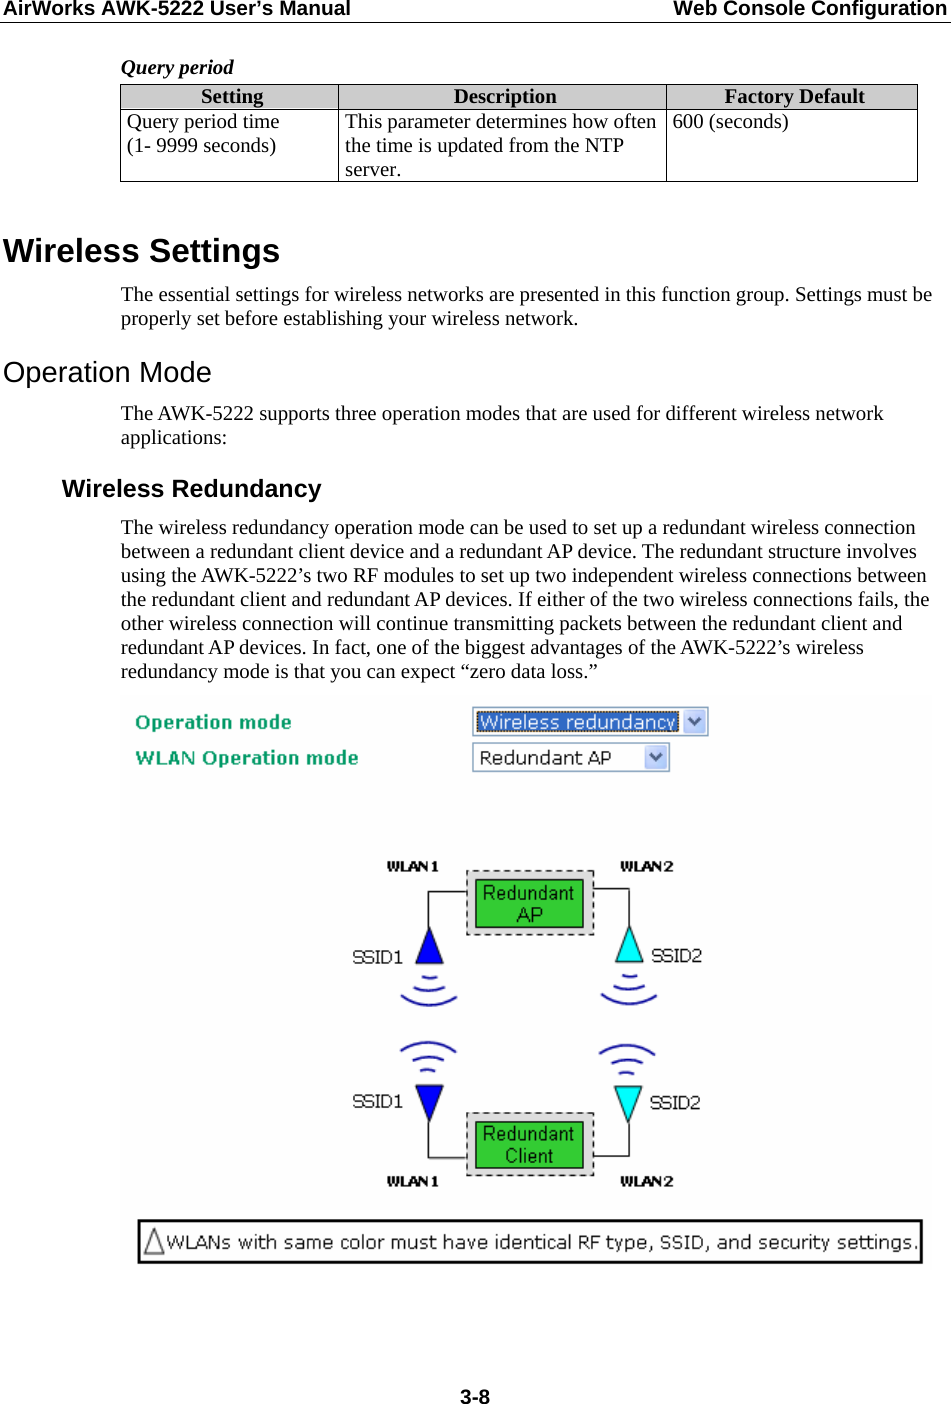 AirWorks AWK-5222 User’s Manual  Web Console Configuration  3-8Query period Setting  Description  Factory Default Query period time (1- 9999 seconds)  This parameter determines how often the time is updated from the NTP server. 600 (seconds)  Wireless Settings The essential settings for wireless networks are presented in this function group. Settings must be properly set before establishing your wireless network. Operation Mode The AWK-5222 supports three operation modes that are used for different wireless network applications: Wireless Redundancy The wireless redundancy operation mode can be used to set up a redundant wireless connection between a redundant client device and a redundant AP device. The redundant structure involves using the AWK-5222’s two RF modules to set up two independent wireless connections between the redundant client and redundant AP devices. If either of the two wireless connections fails, the other wireless connection will continue transmitting packets between the redundant client and redundant AP devices. In fact, one of the biggest advantages of the AWK-5222’s wireless redundancy mode is that you can expect “zero data loss.”   